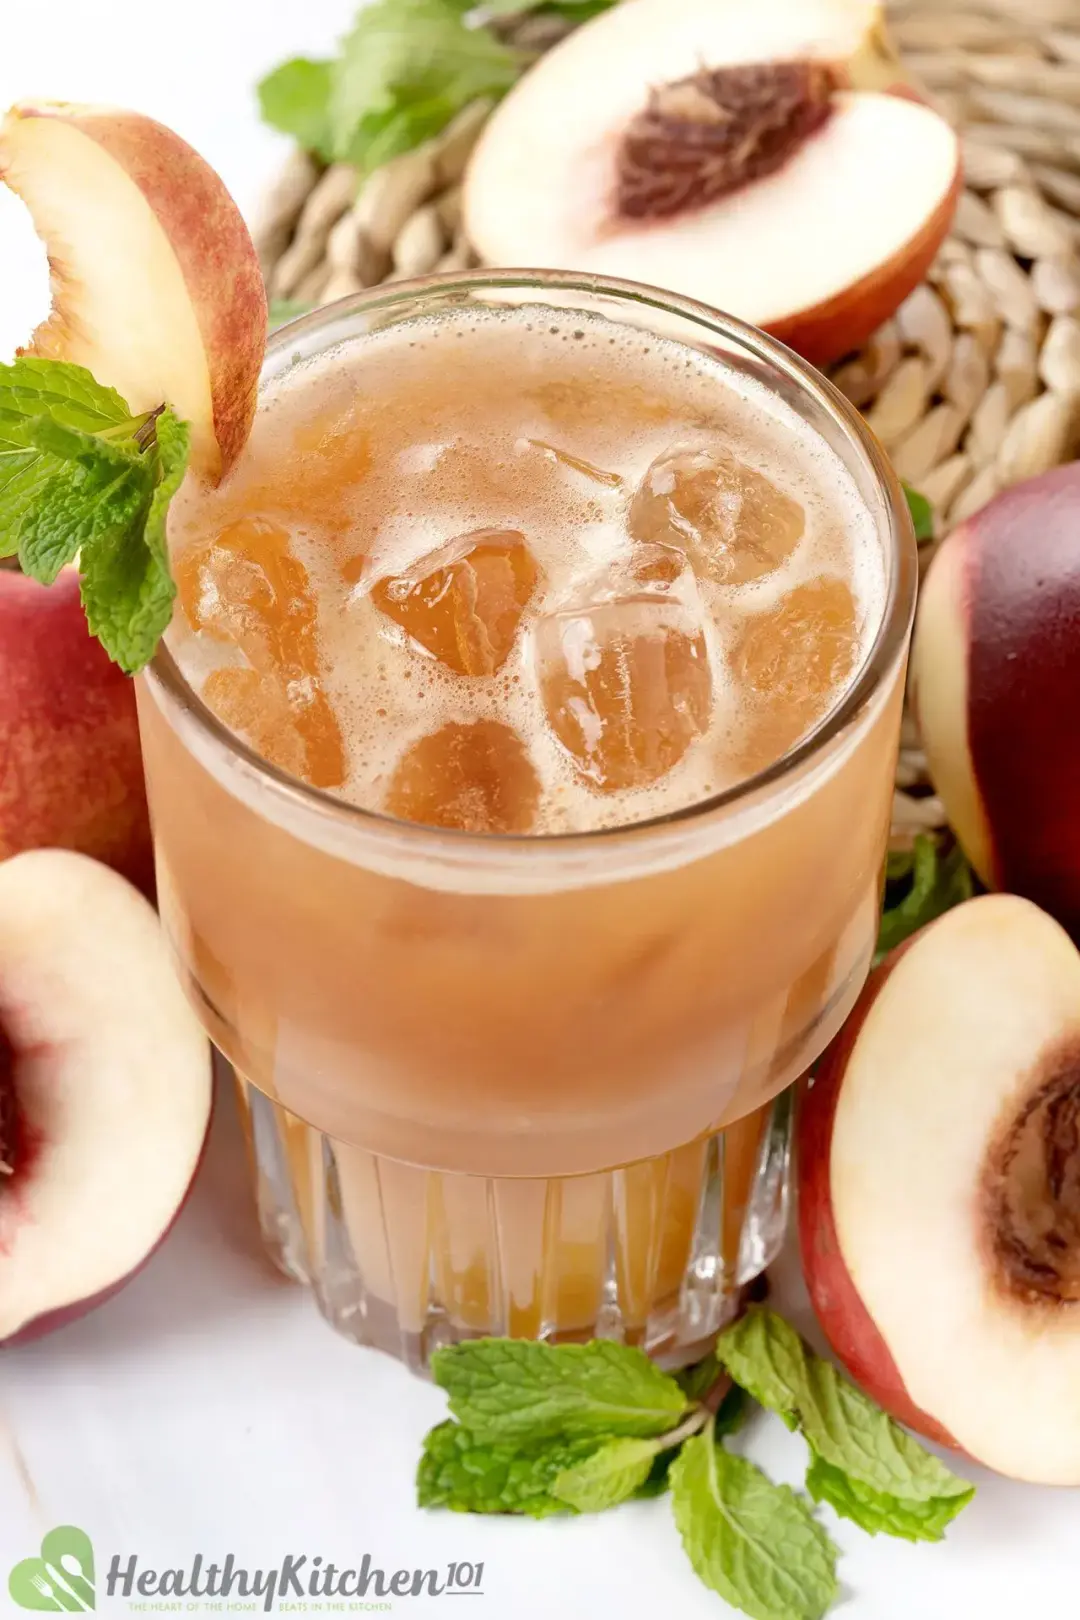 An iced glass of brown peach juice, next to peach halves and mint leaves